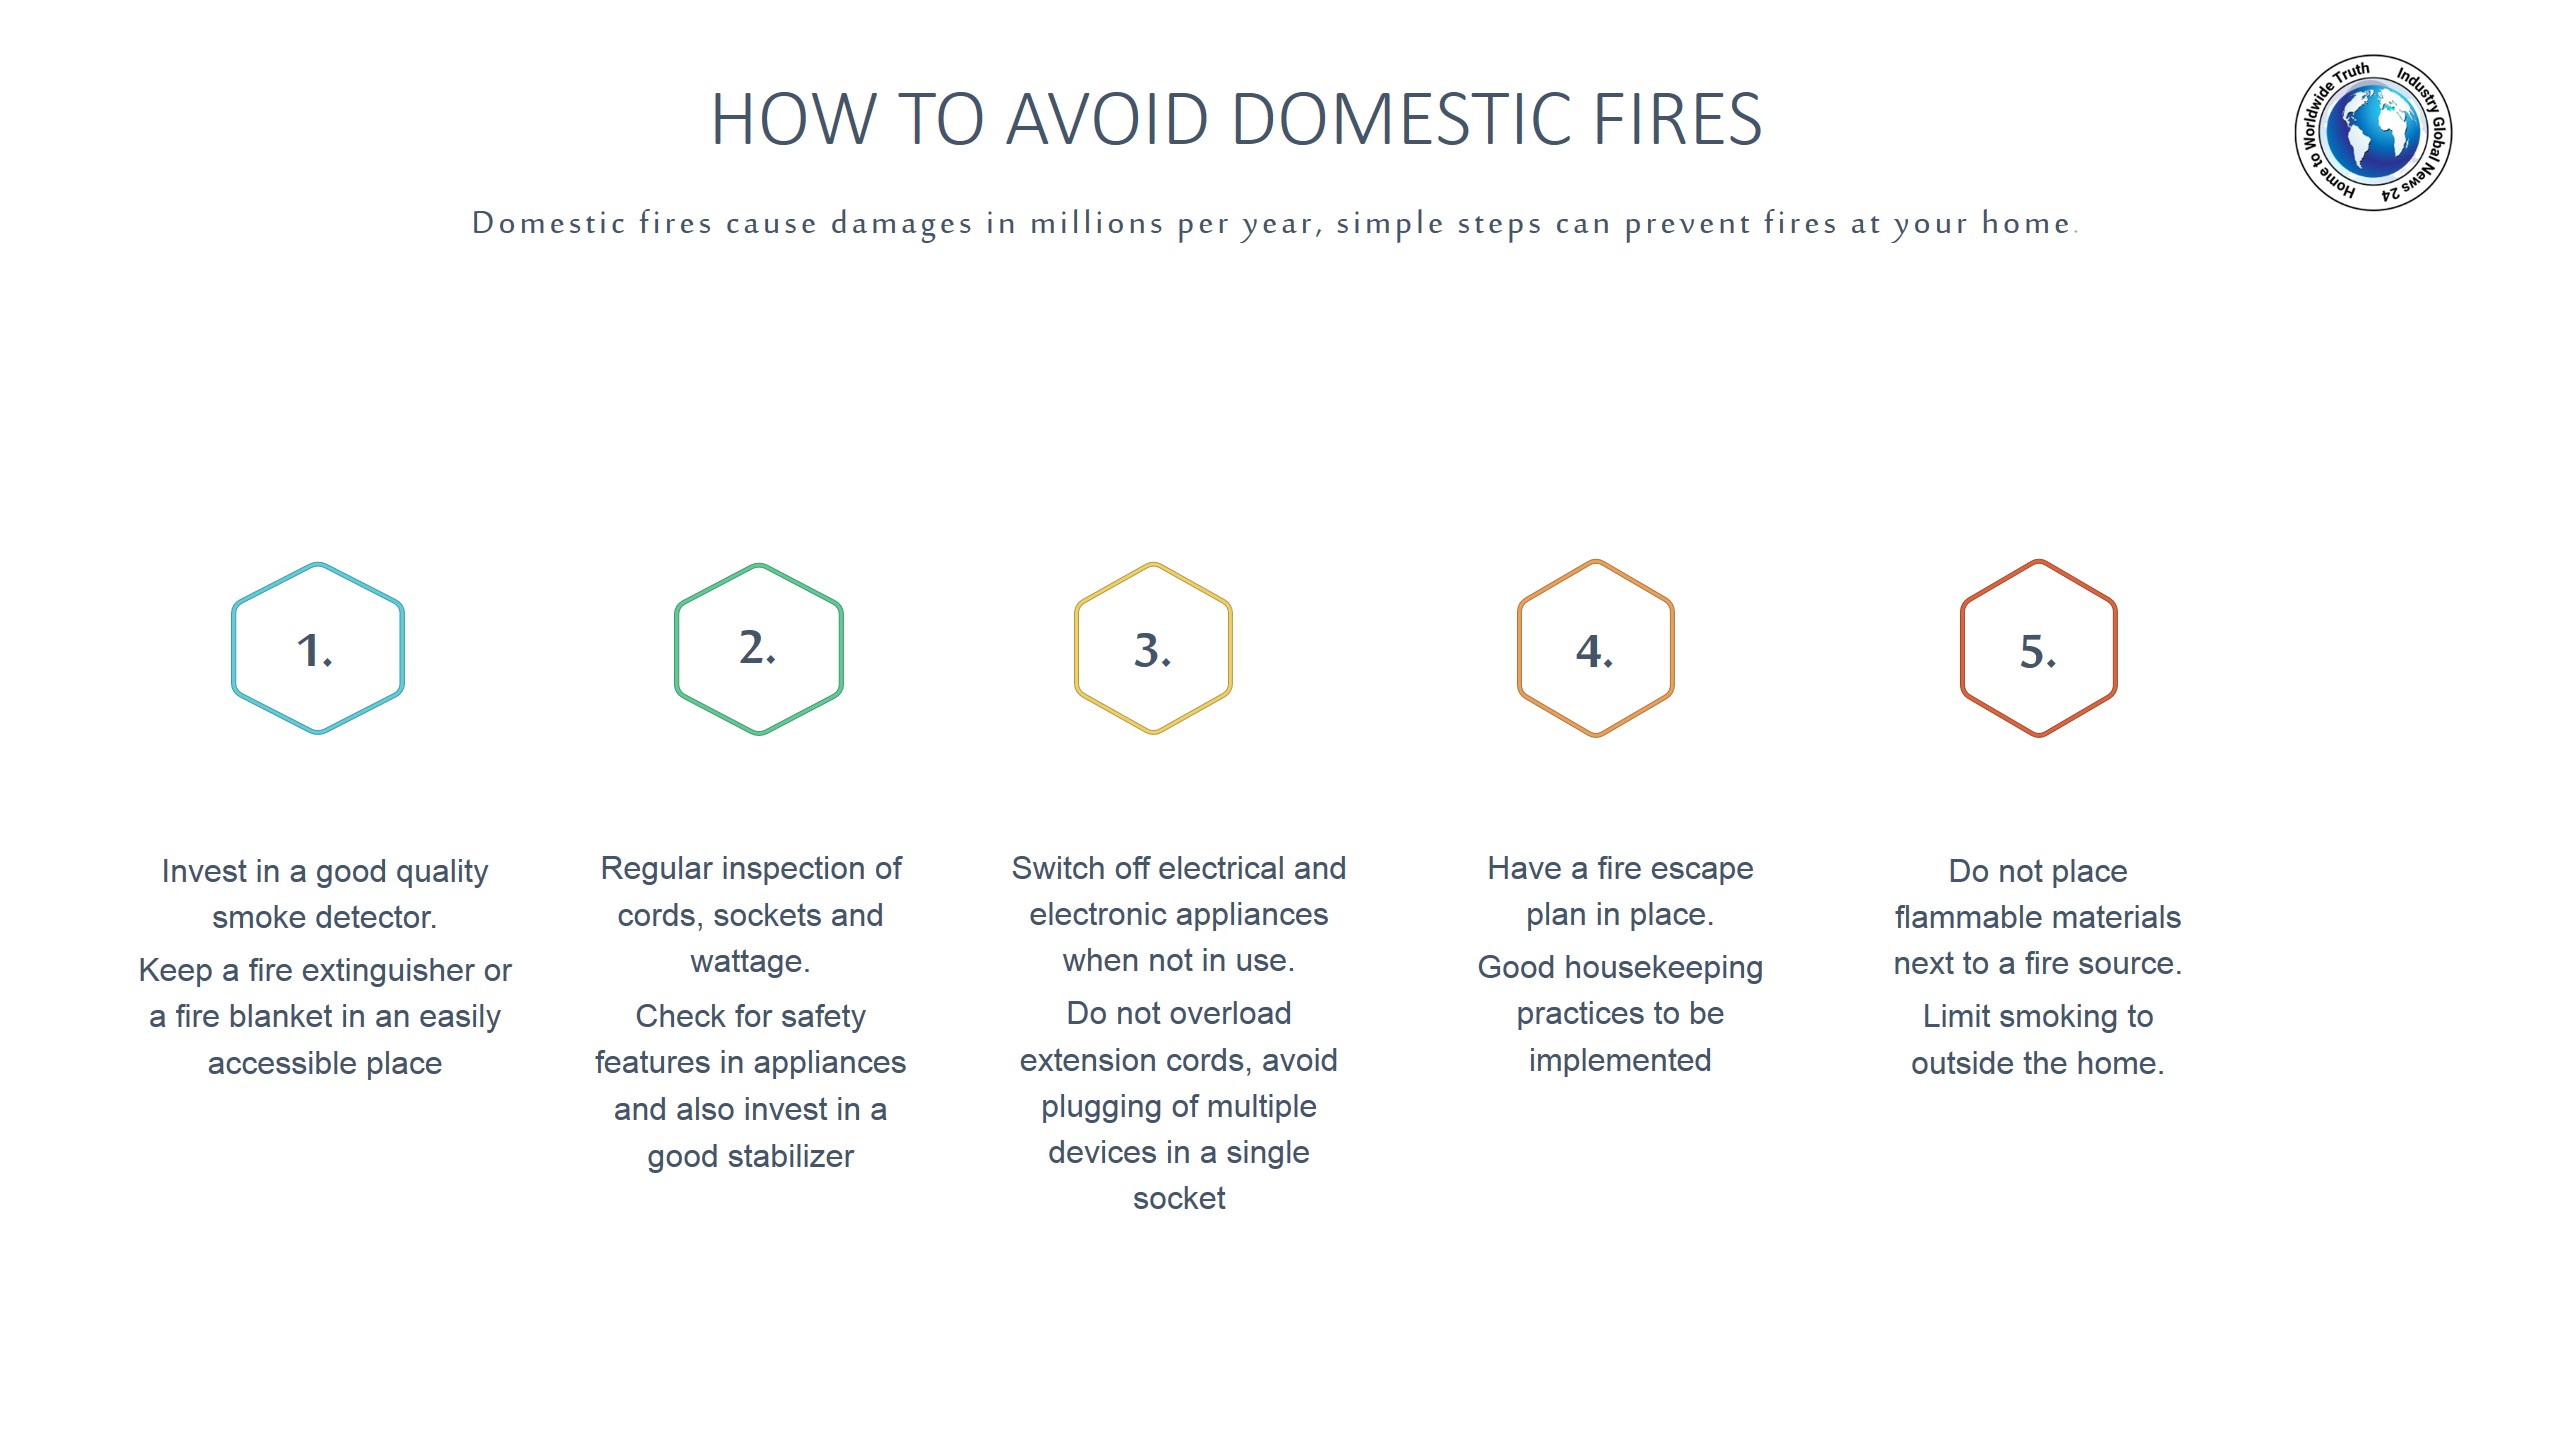 How to avoid domestic fires